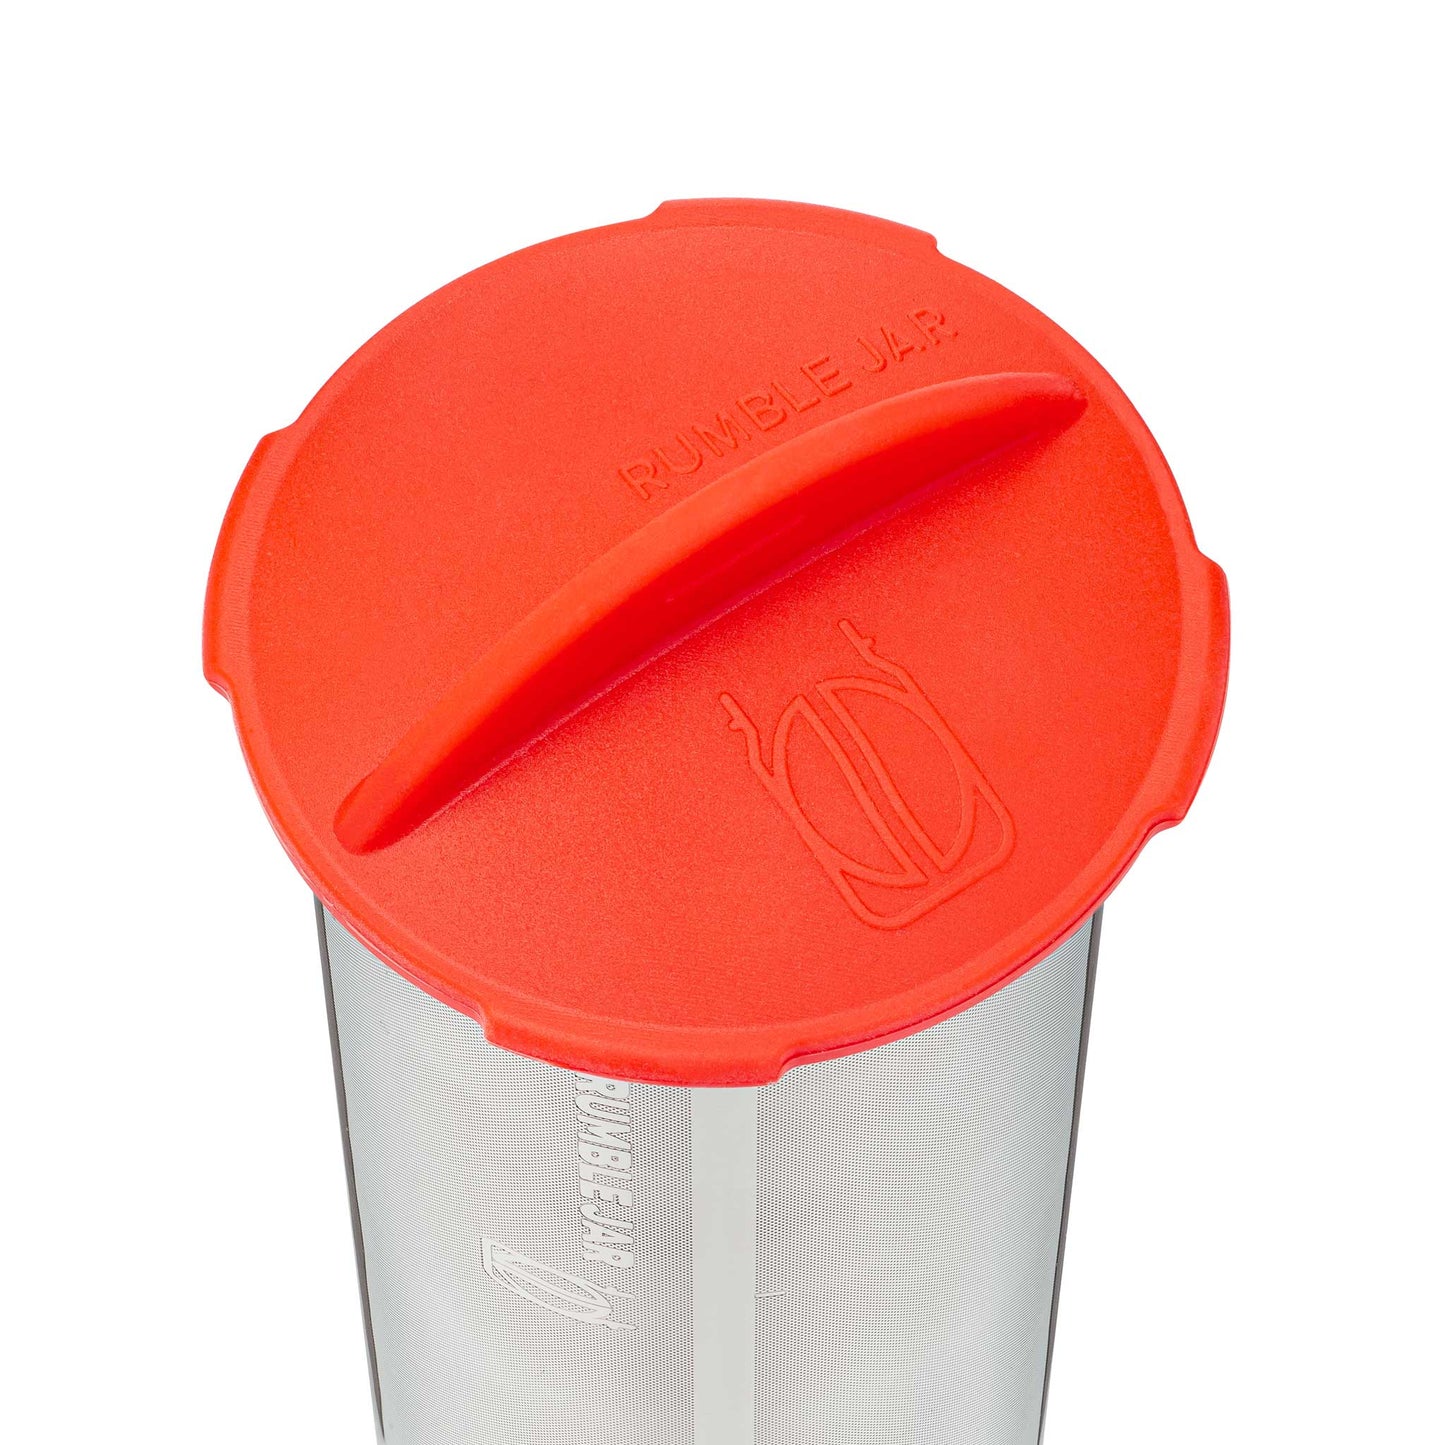 Rumble Jar's silicone cap in the orangey-red color